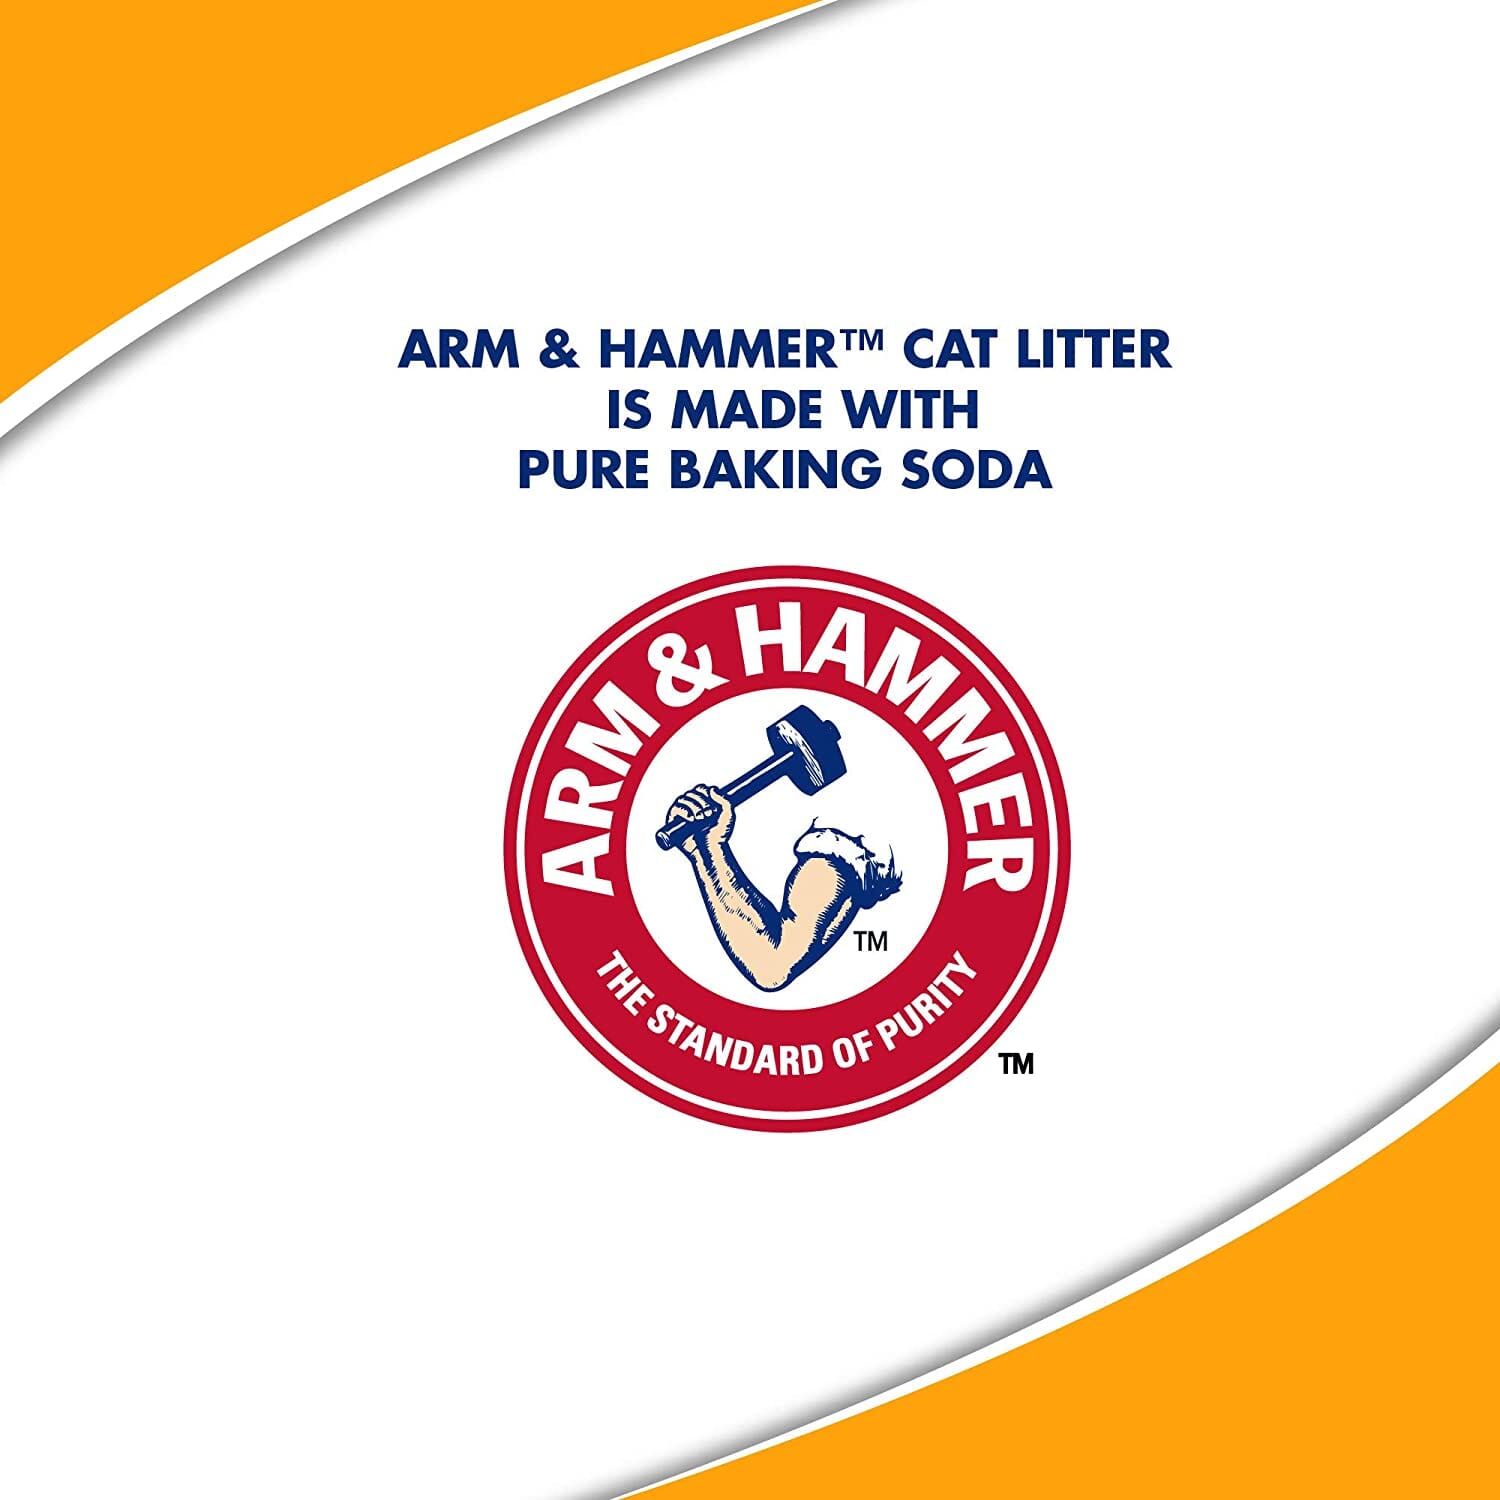 Arm & Hammer Super Scoop Clumping Cat Litter - Fragrance Free - 14 Lbs - 3 Pack  